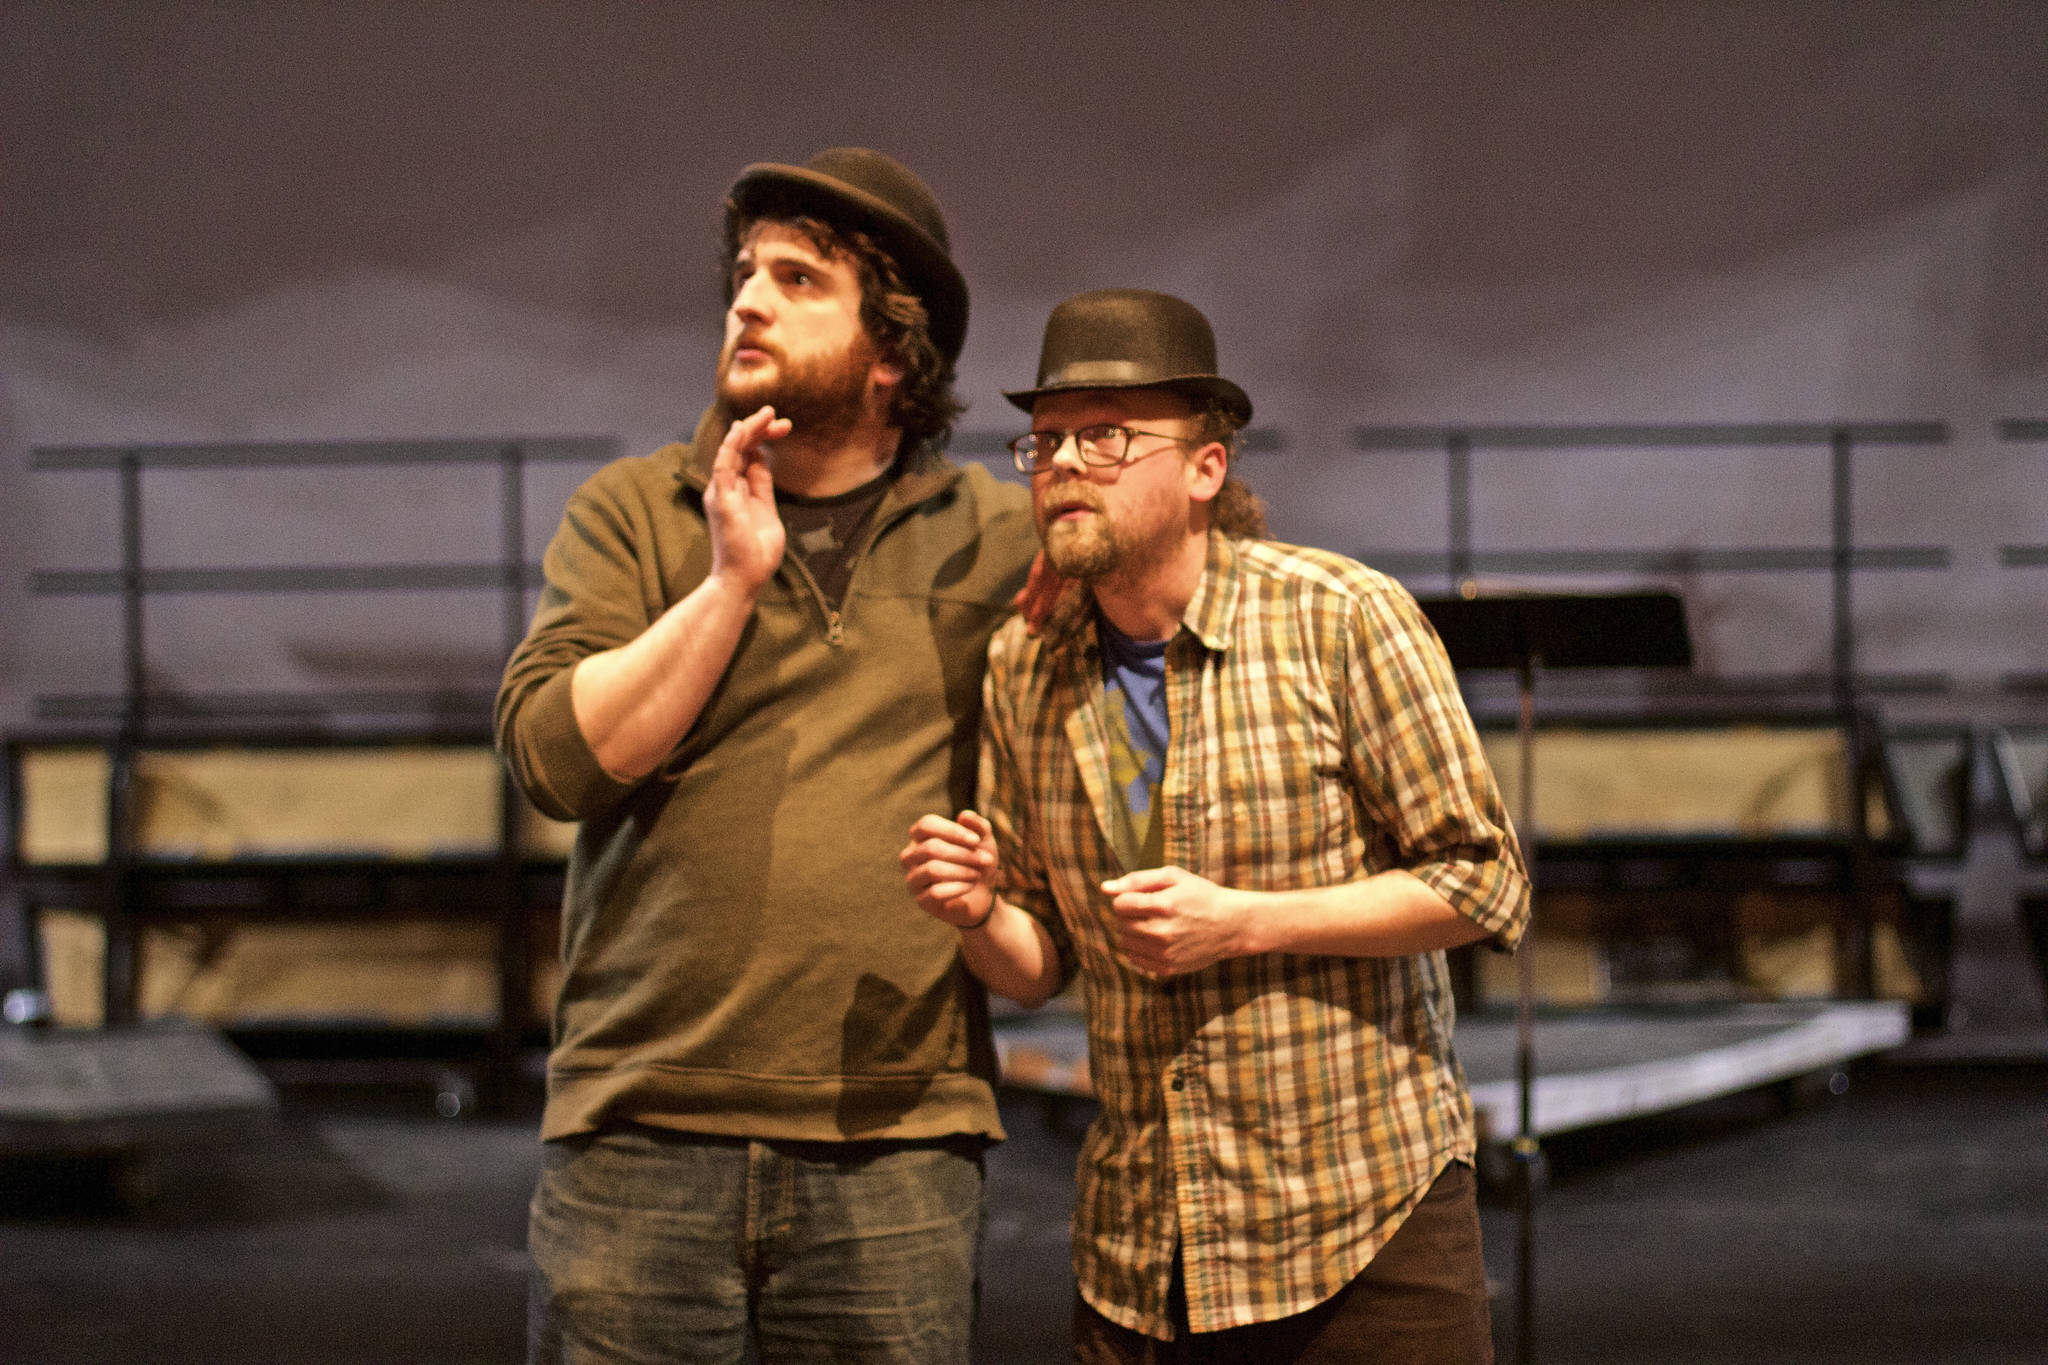 Photo by Richard Rose Peter Sheppard, left, and Matt Lees, right practice a scene from Samuel Beckett’s “Waiting for Godot.” Sheppard directs the play, opening at 7 p.m. Friday, May 25, for the start of Pier One Theatre’s 2018 season.